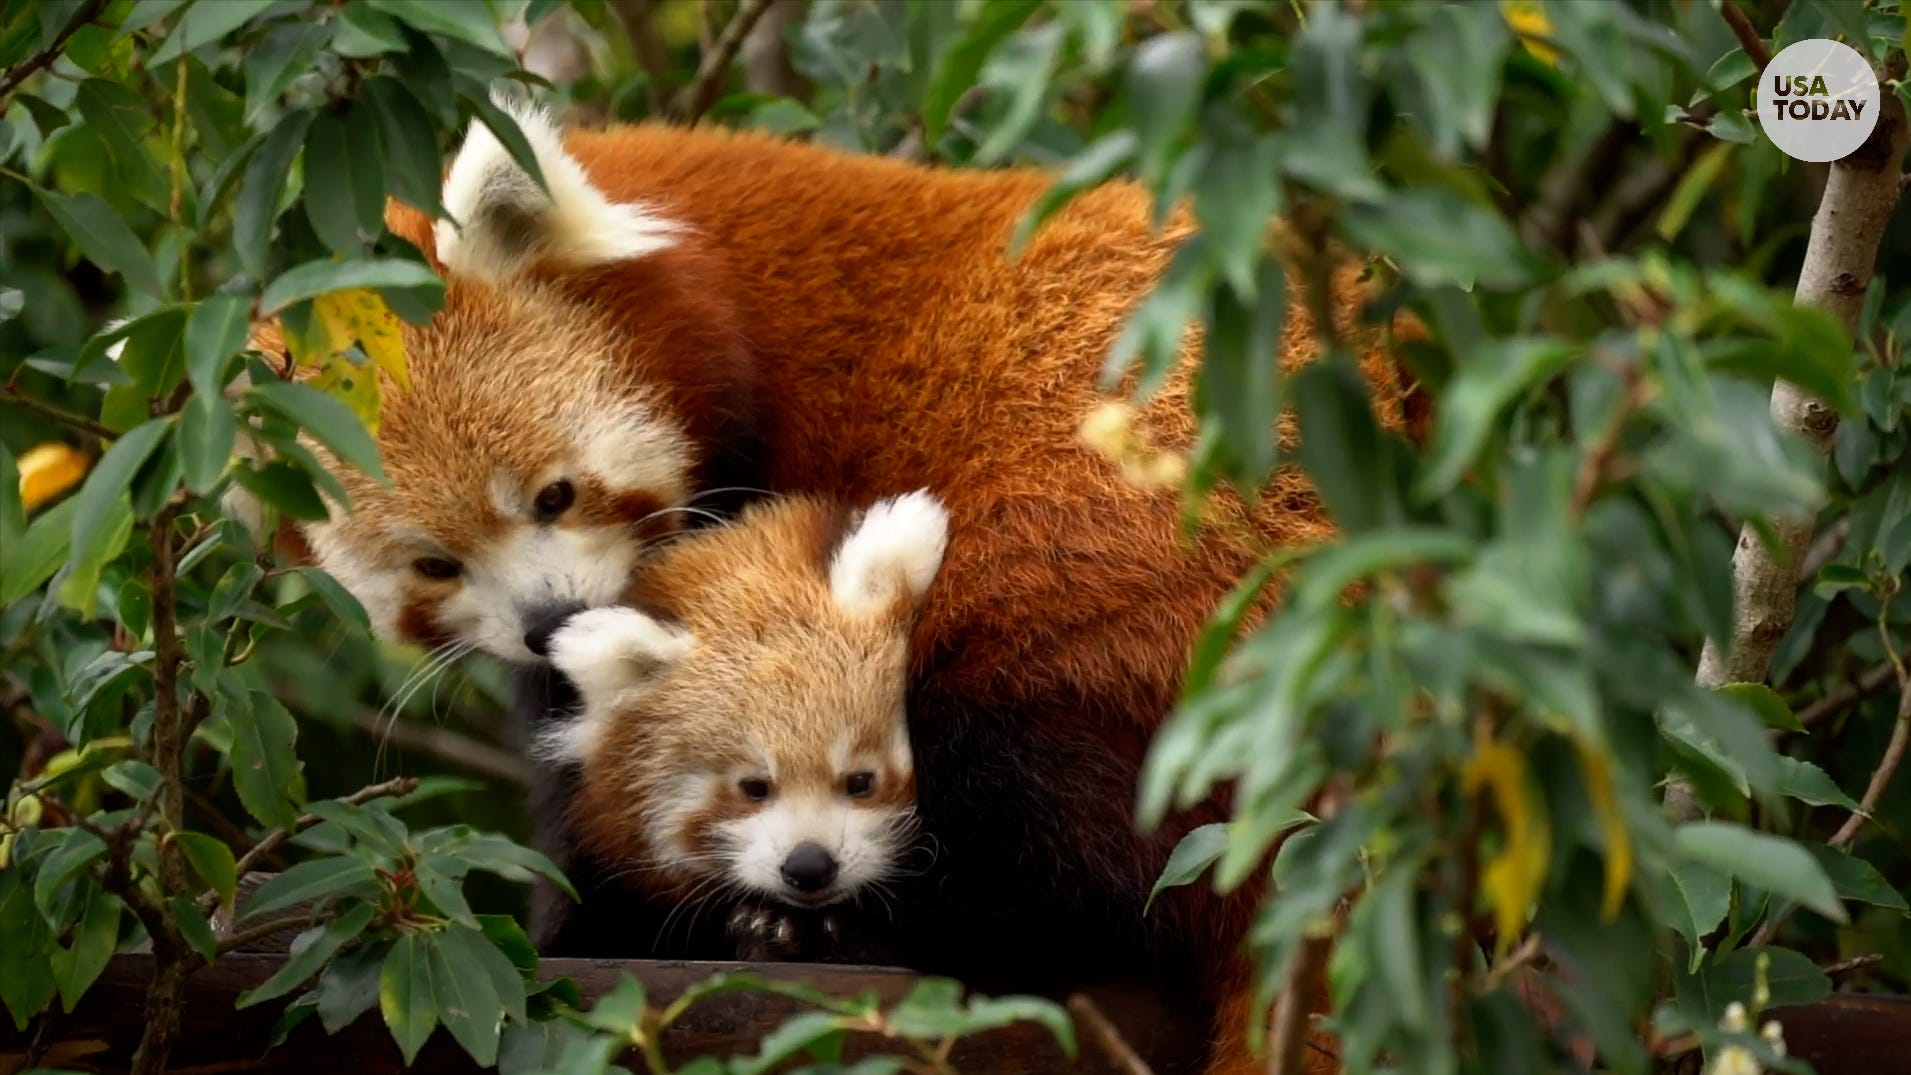 Endangered red panda cub takes first steps outside of nest box at wildlife park in England